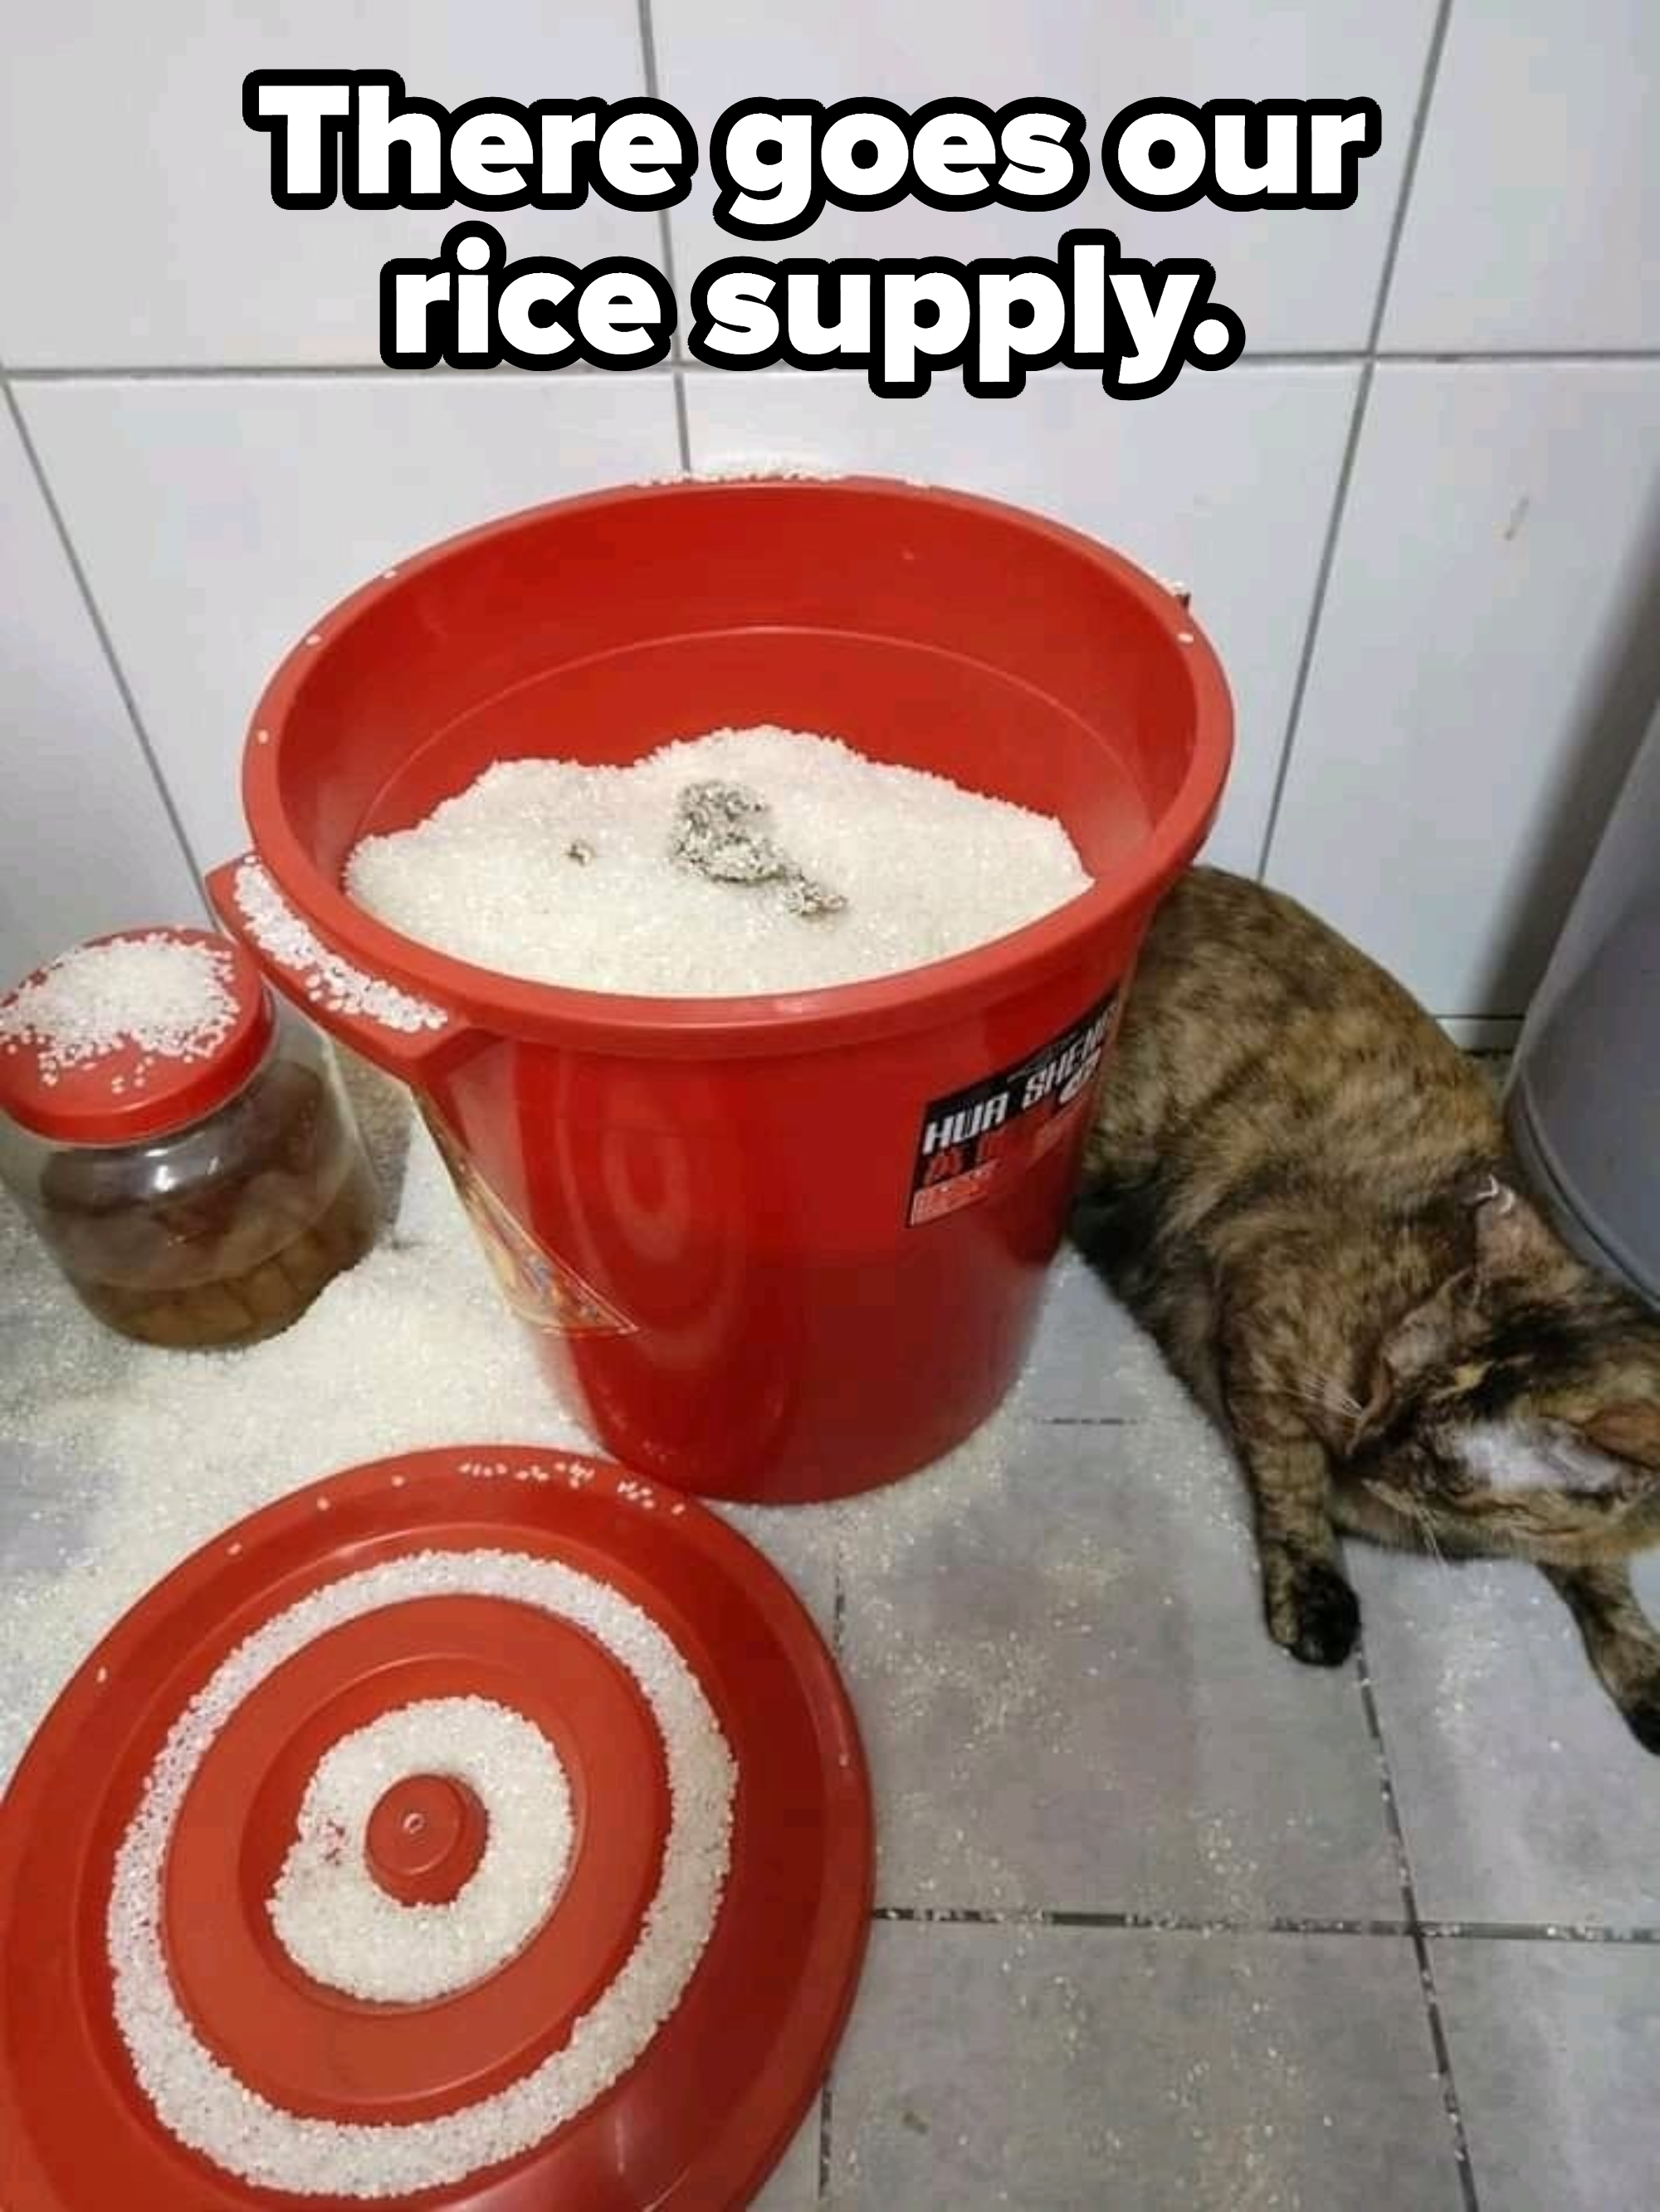 A cat has used a pail of rice as a litter box